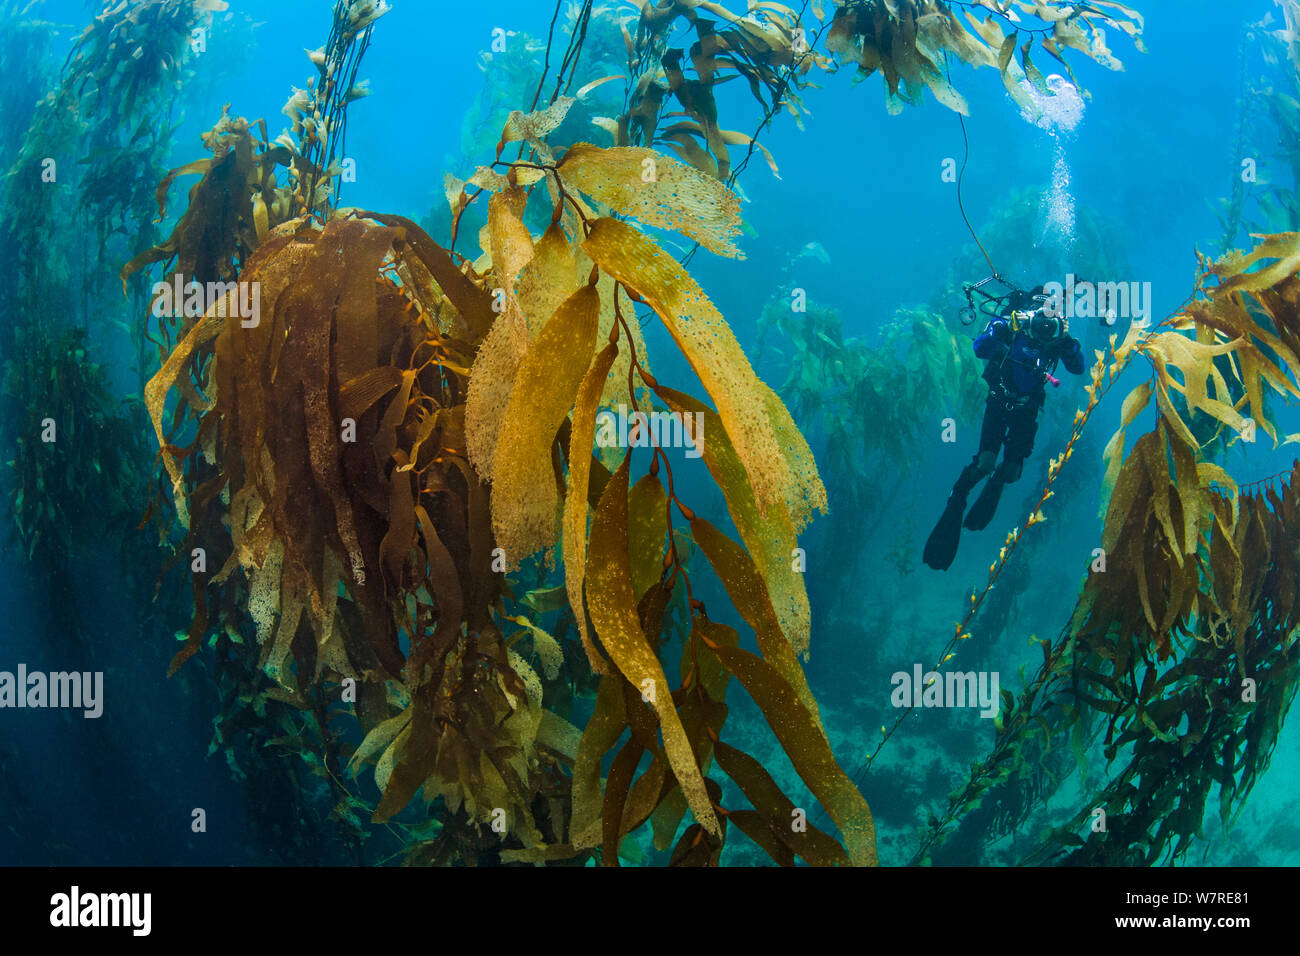 A diver photographs in a giant kelp forest (Macrocystis pyrifera). Fortescue Bay, Tasmania, Australia. Tasman Sea. This is the same species of giant kelp which is widespread on the Pacific coast of North America. In Australia these forests are only found in Tasmania. Stock Photo